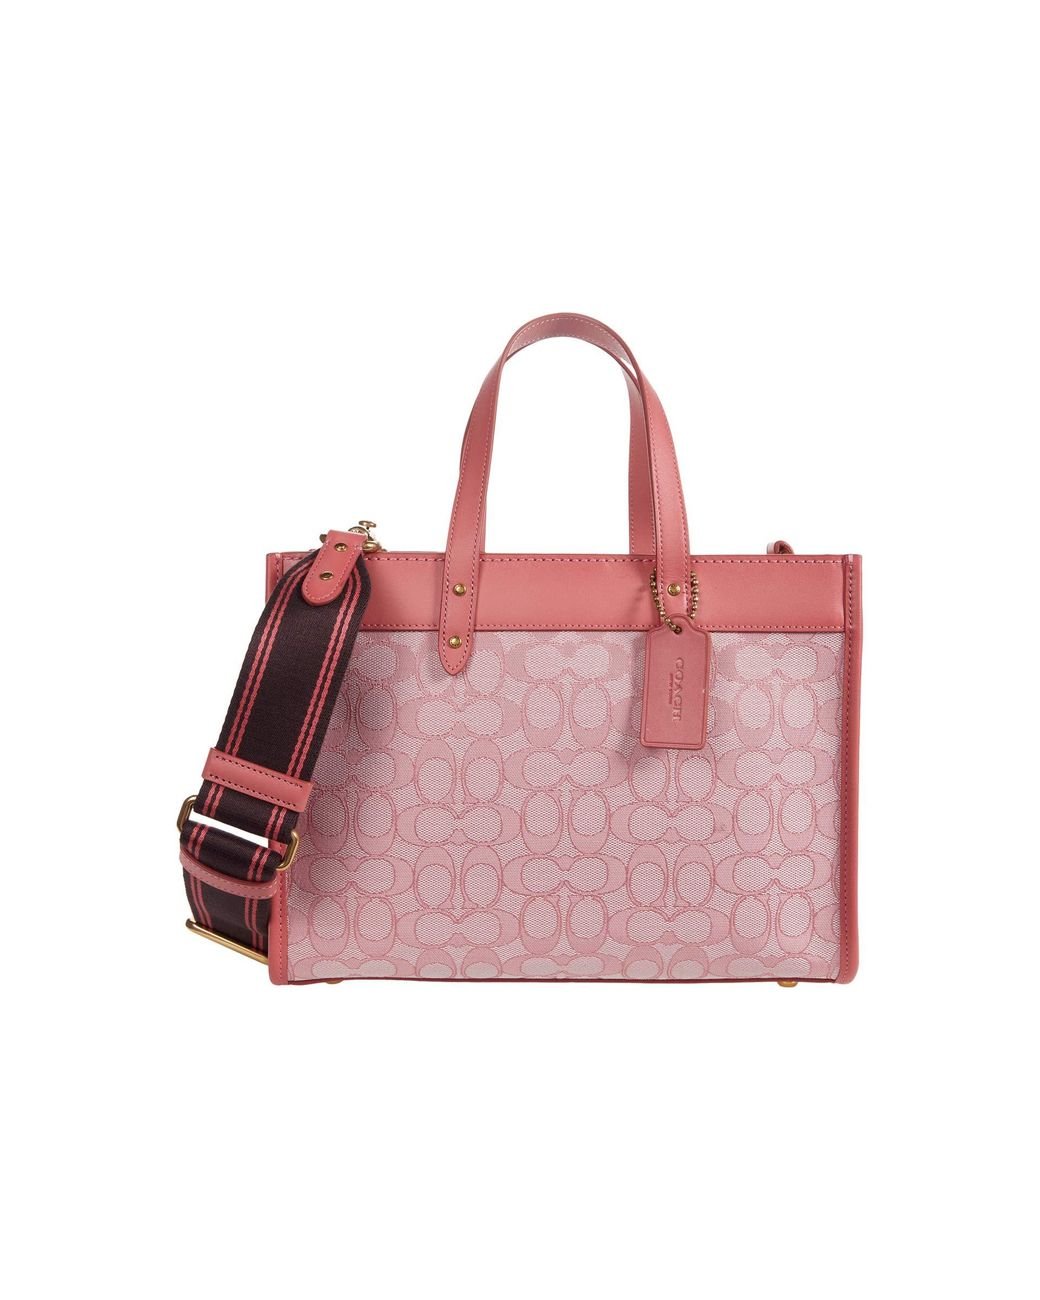 COACH Leather Signature Jacquard Field Tote 30 Handbags in Pink - Lyst